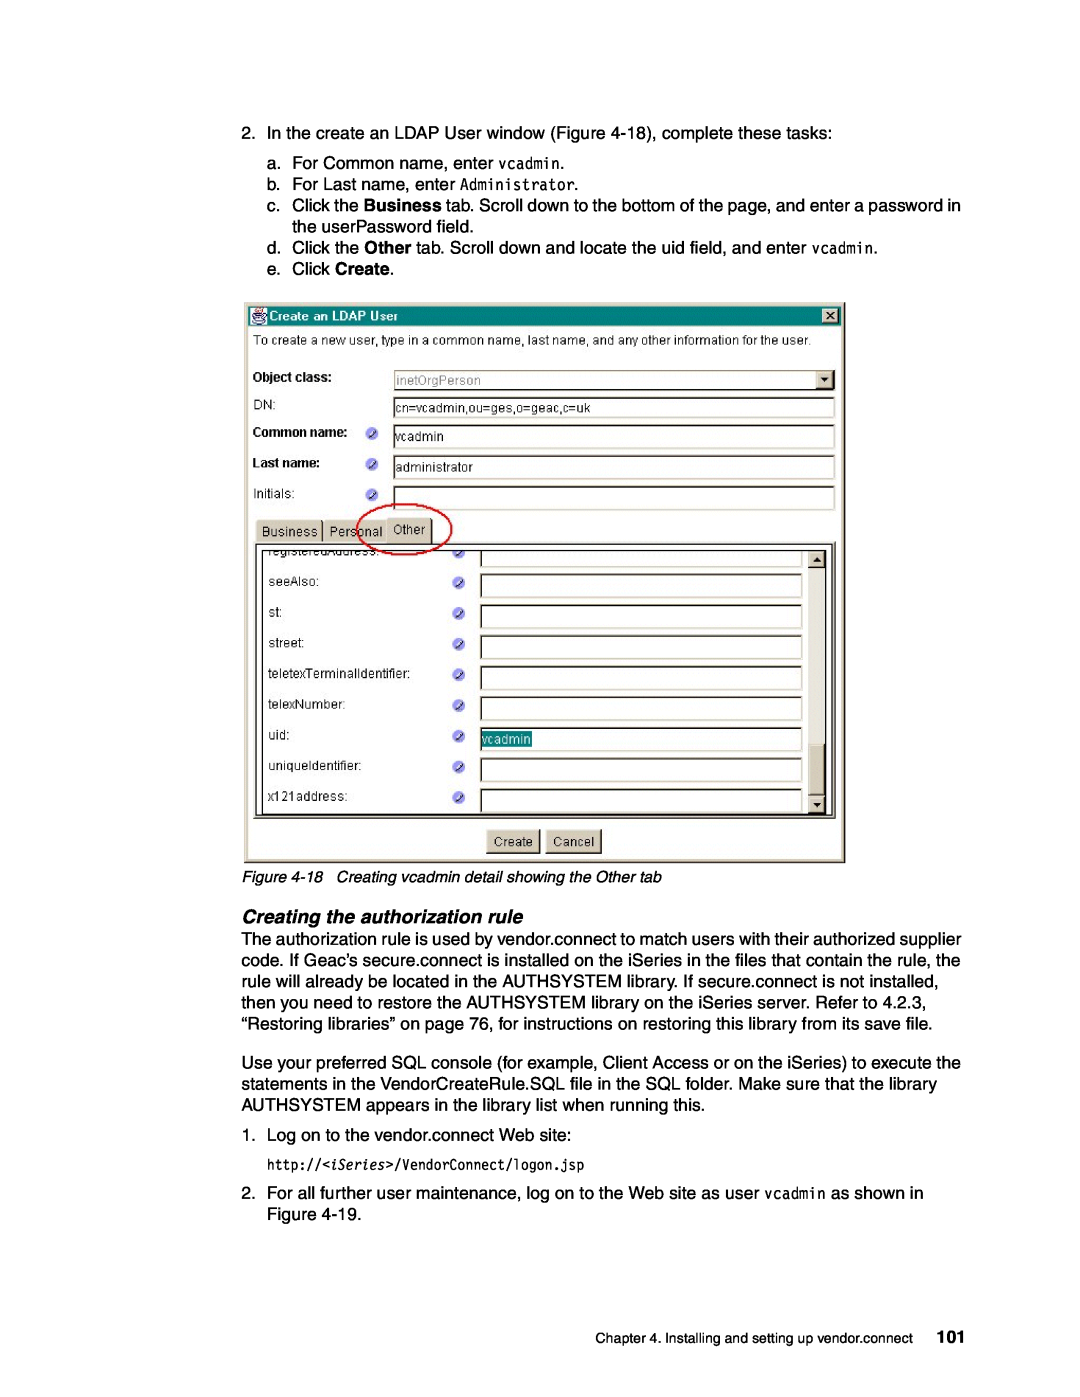 IBM SG24-6526-00 manual Creating the authorization rule 